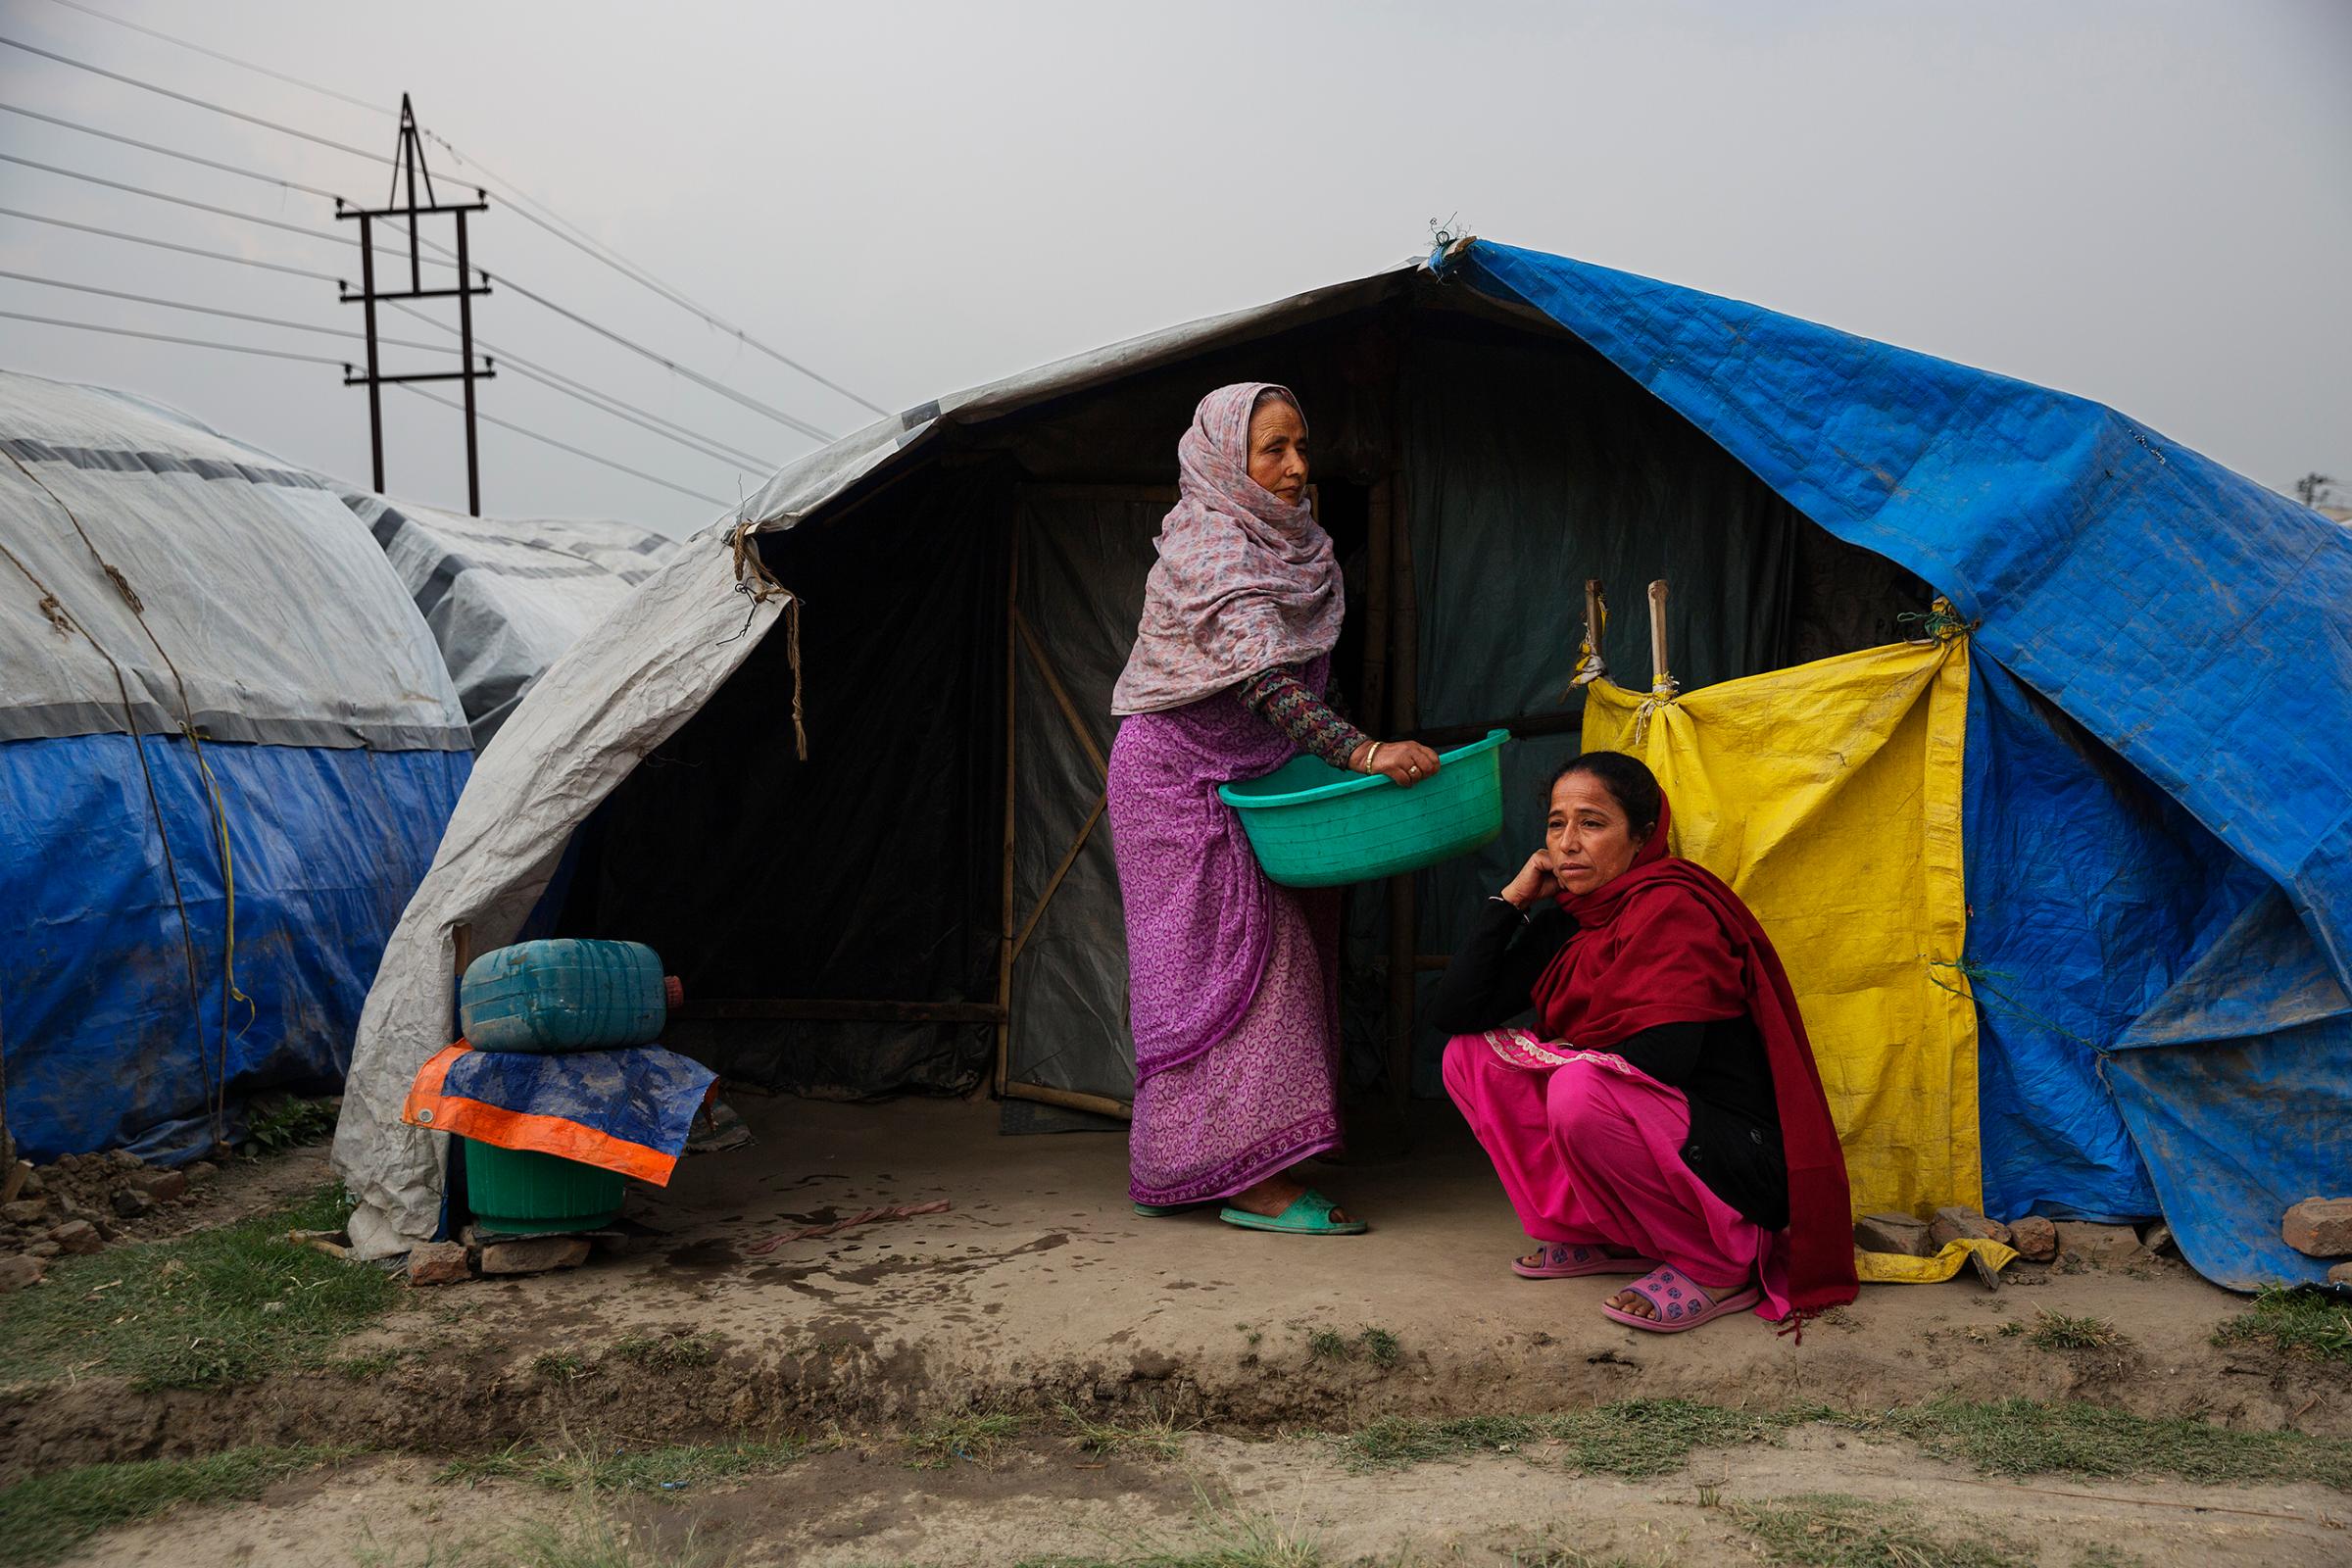 Approaching the first anniversary of the Nepal earthquakes, many people still live in squalid conditions in a tent encampment in central Katmandu, Nepal, March 30, 2016.